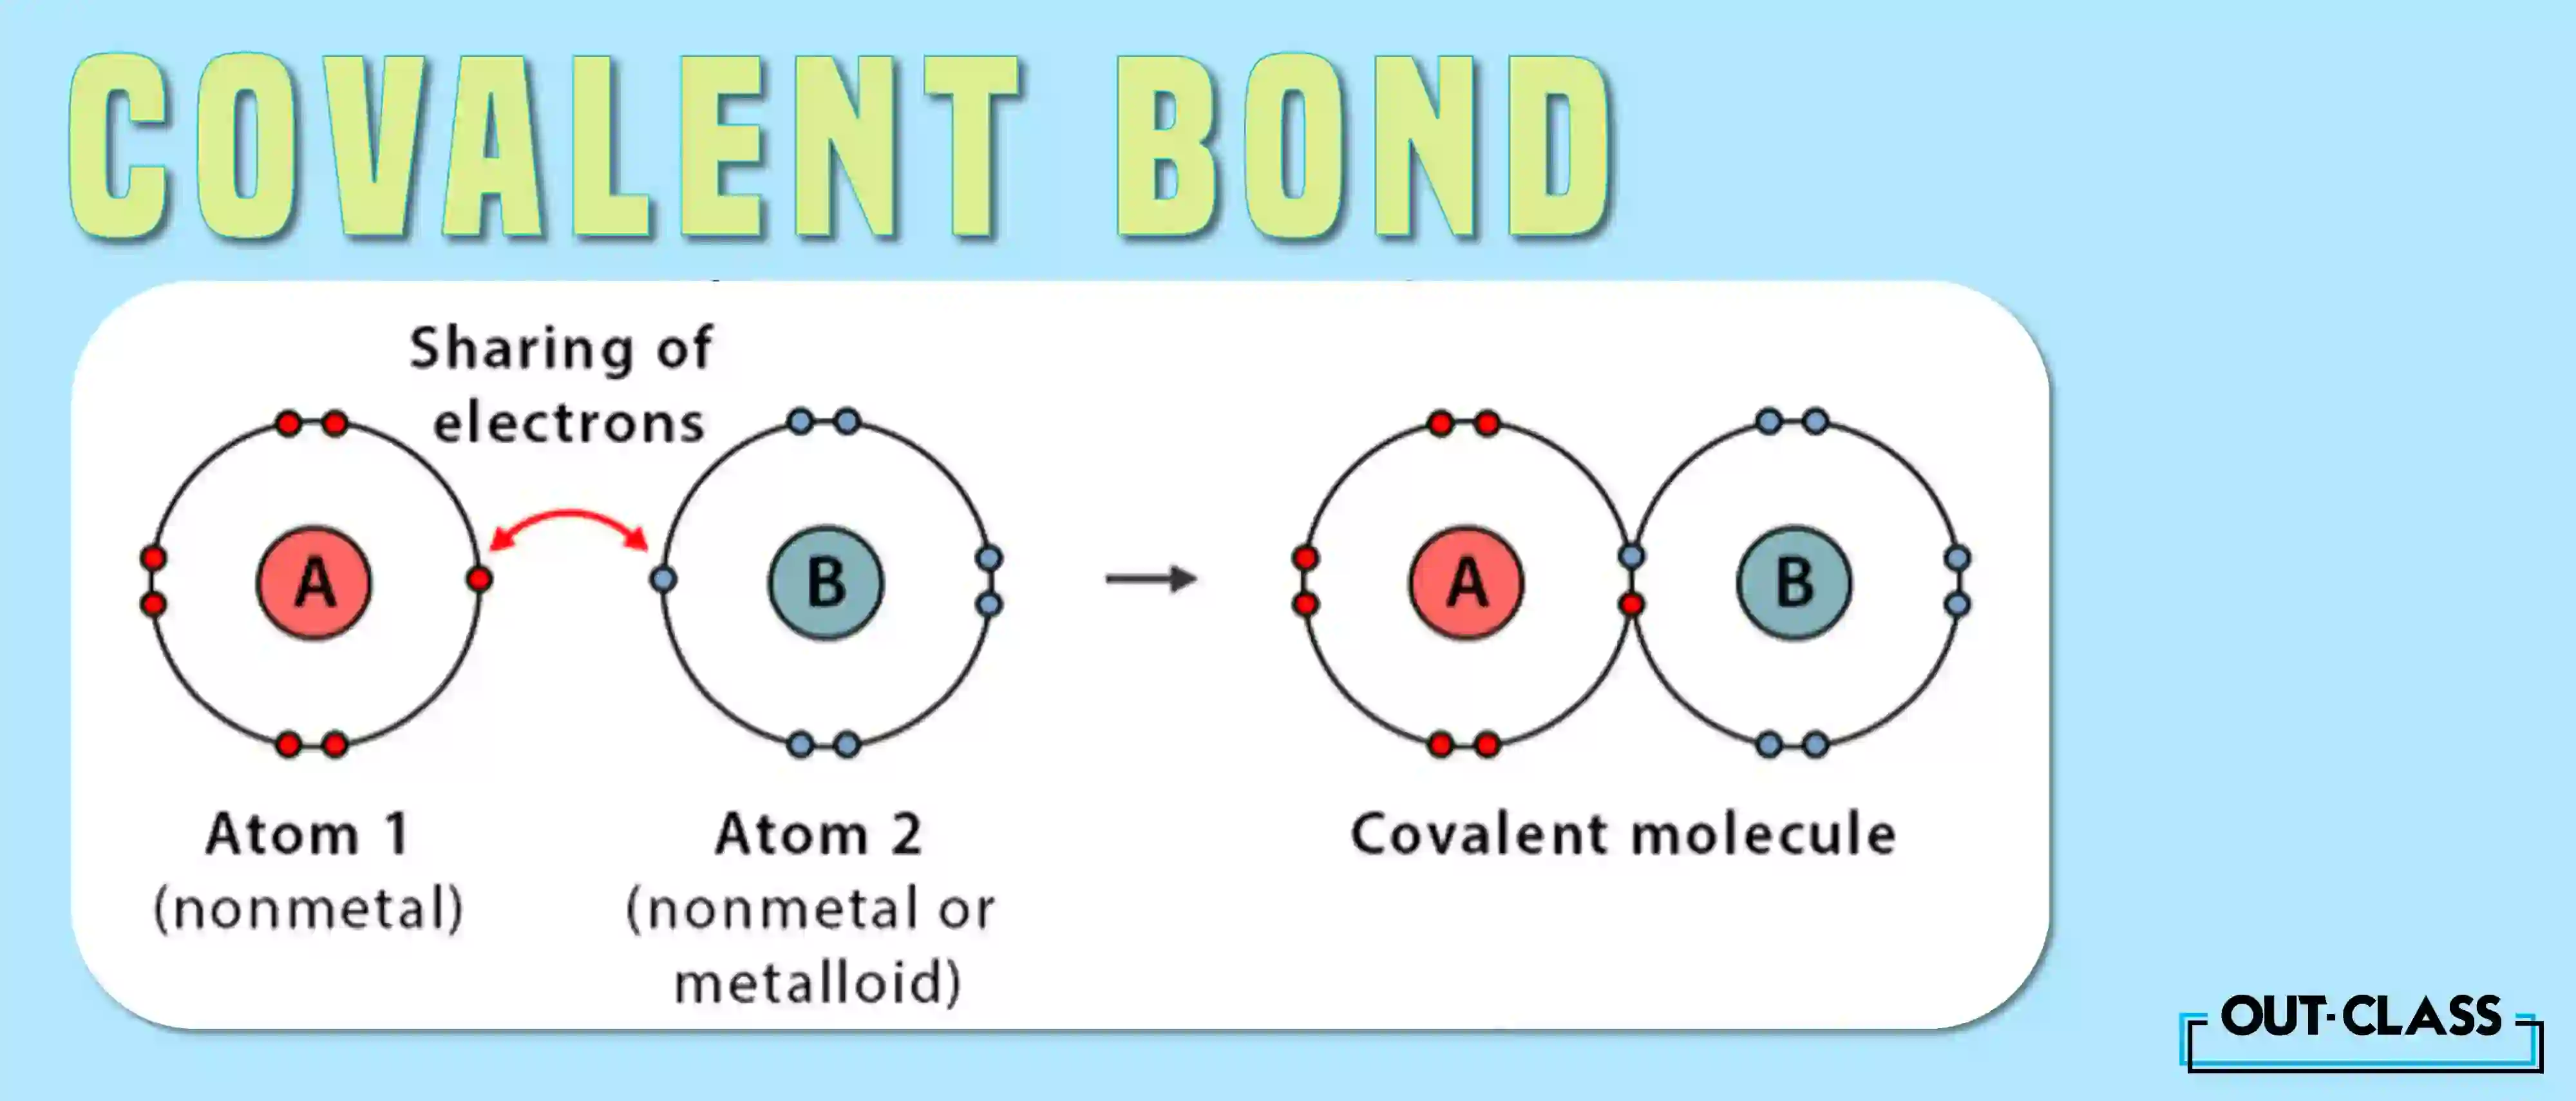 On the covalent frontier, atoms engage in an electron-sharing rendezvous, particularly among non-metals. Here, the objective is a noble pursuit of a full outer shell, and atoms achieve this by collaboratively sharing electrons in a bond. 